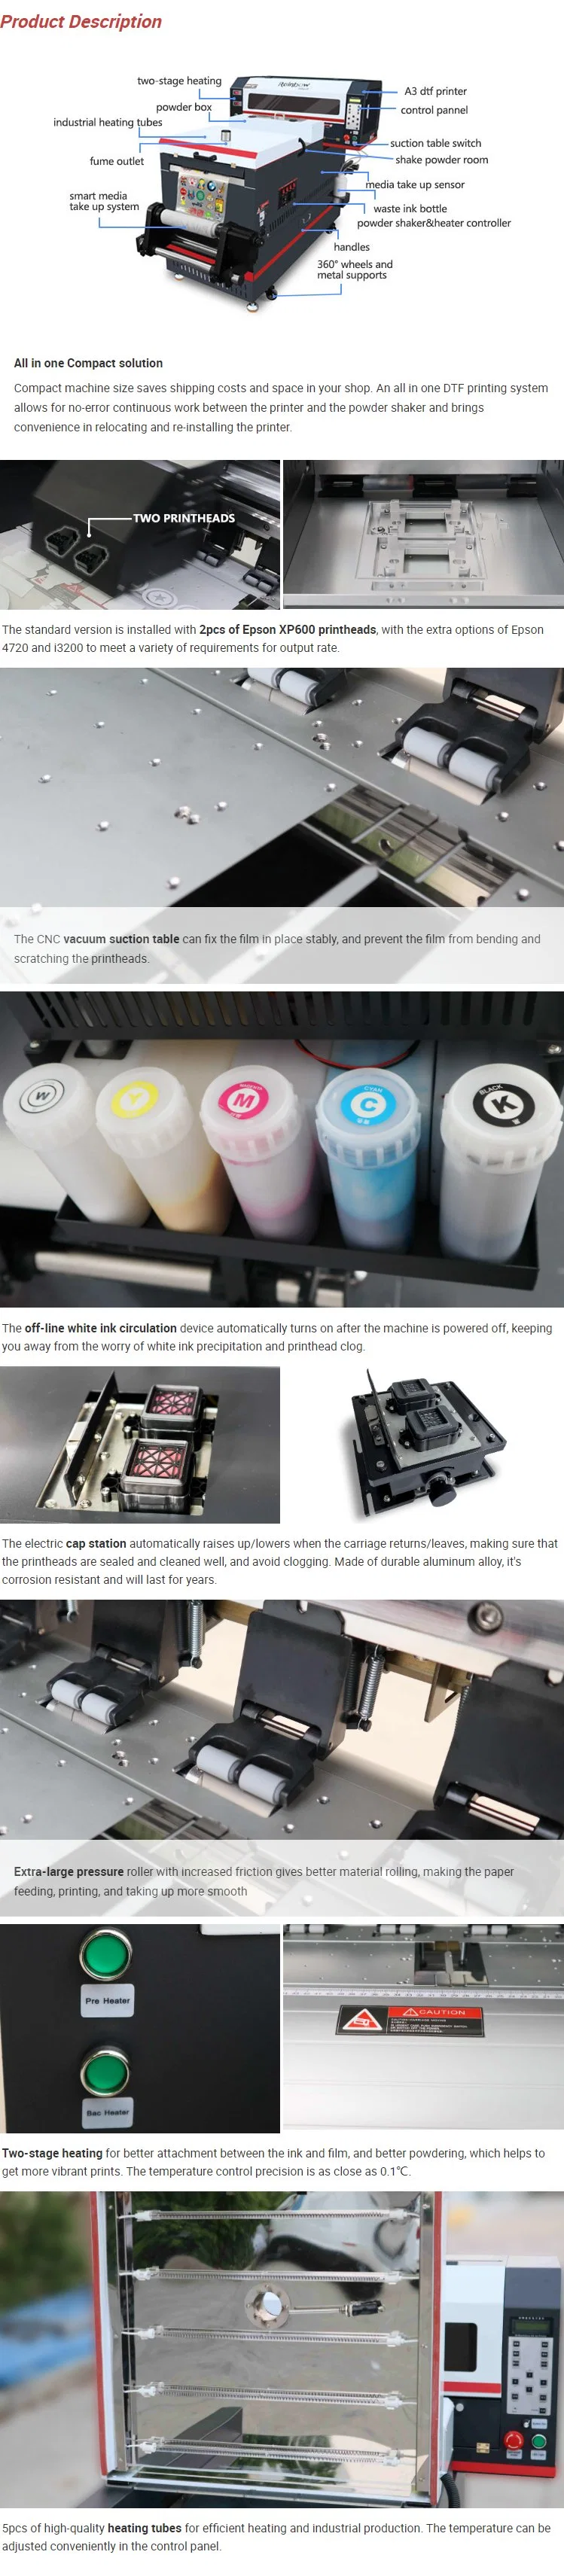 Dtf Printer Set for Swimwear Rainjackets Face Masks Bath Towels A3 Size 30cm Dtf Printer All in One